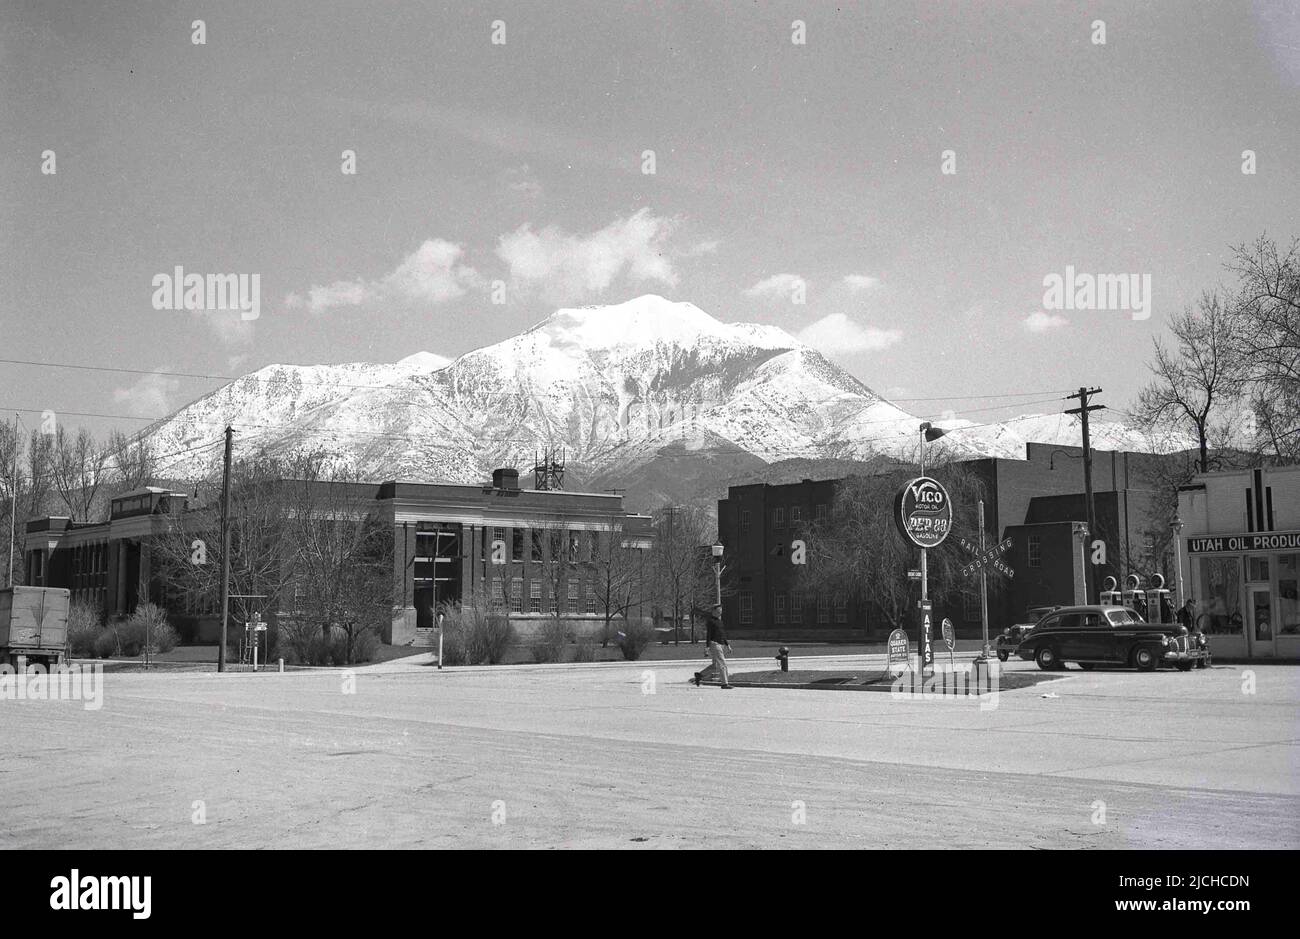 1930s, historical, a car of the era at at a gas station, Utah, USA, with the famous snow covered Wasatch mountains in the distance. A Rail road Crossing sign is on the forecourt, while the name Utah Oil Products is on the garage building. On the station sign the names Vico Motor Oil and Pep 88 gasoline, the oil and gas brands of the Utah Oil Refining Company. The first oil refinery in Utah, established in 1908, these brand names remained in use until 1948, when replaced by the brand name UTOCO. Other motor brands of the day seen; Atlas tyres & batteries & Quaker State motor oil. Stock Photo